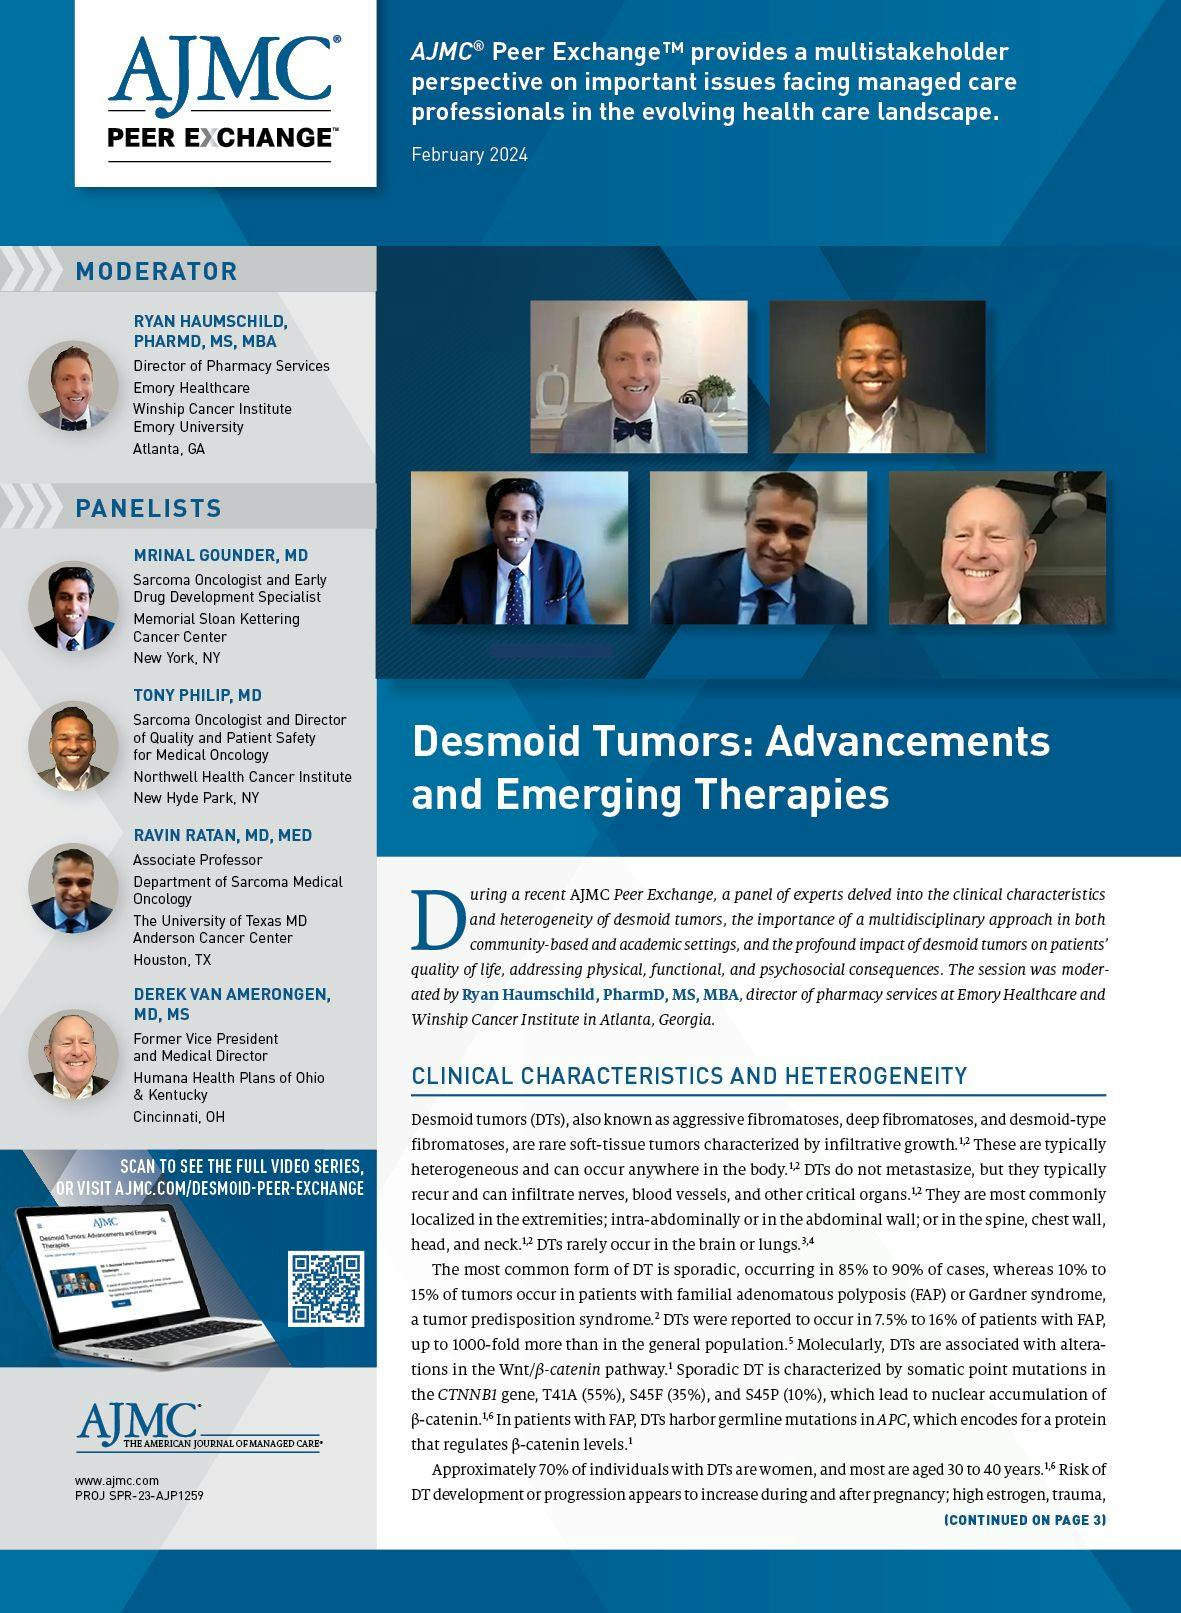 Desmoid Tumors: Advancements and Emerging Therapies